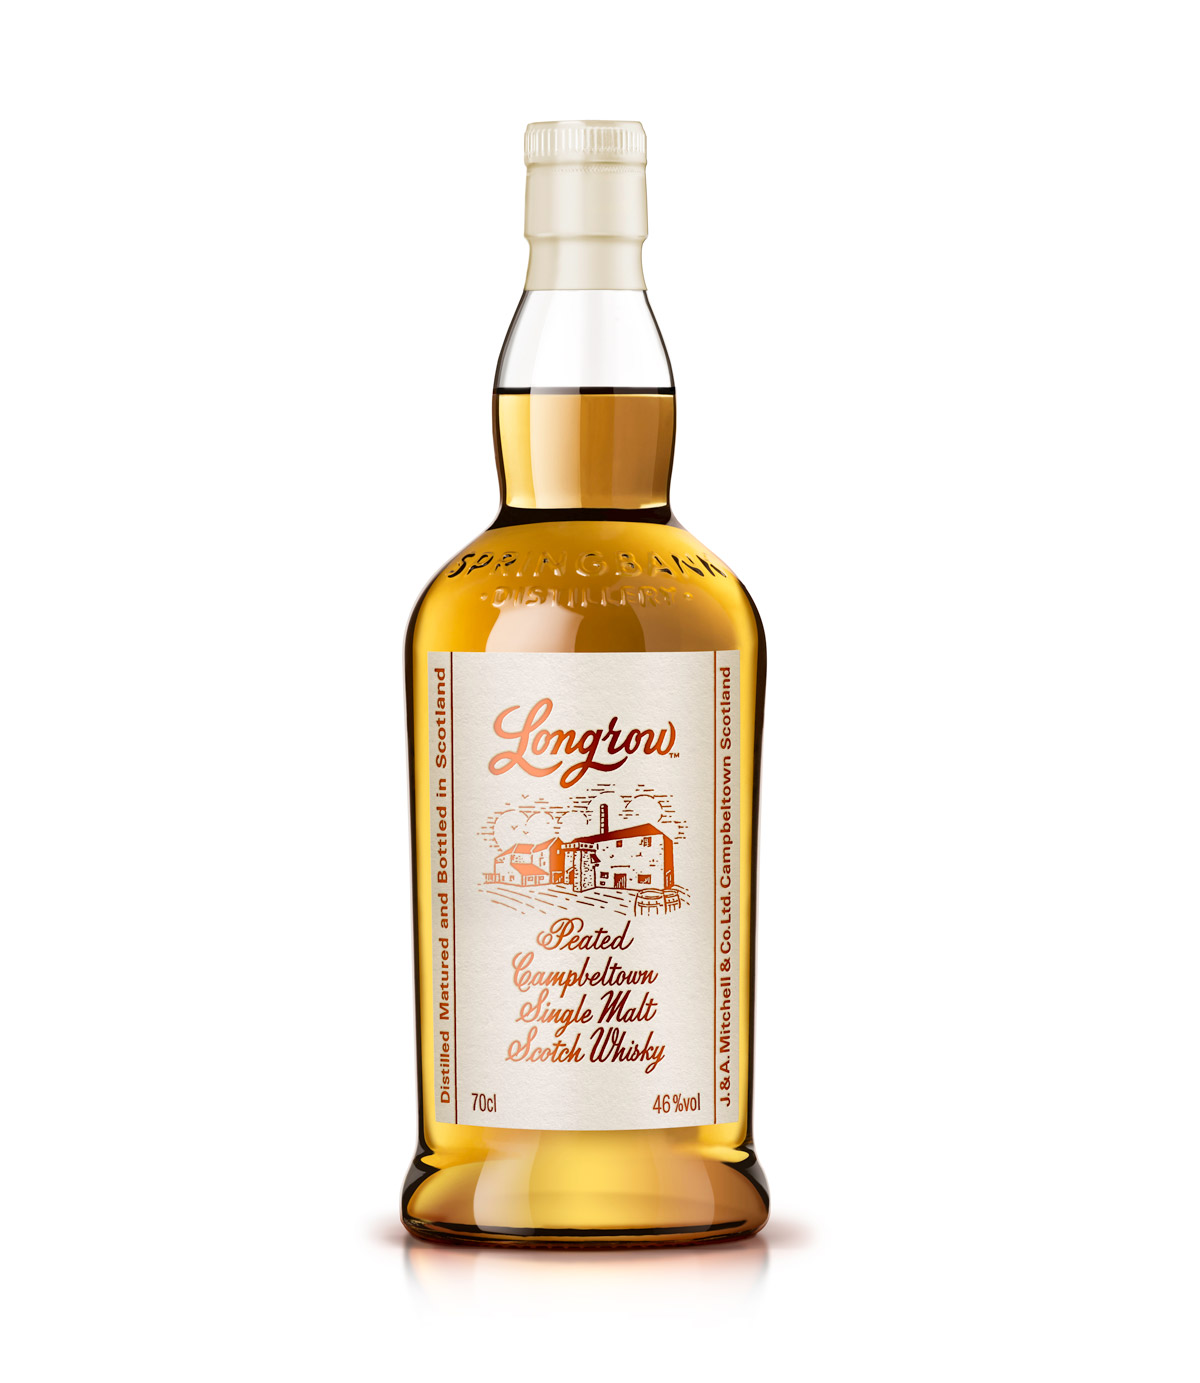 Longrow Peated Cambletown Whisky